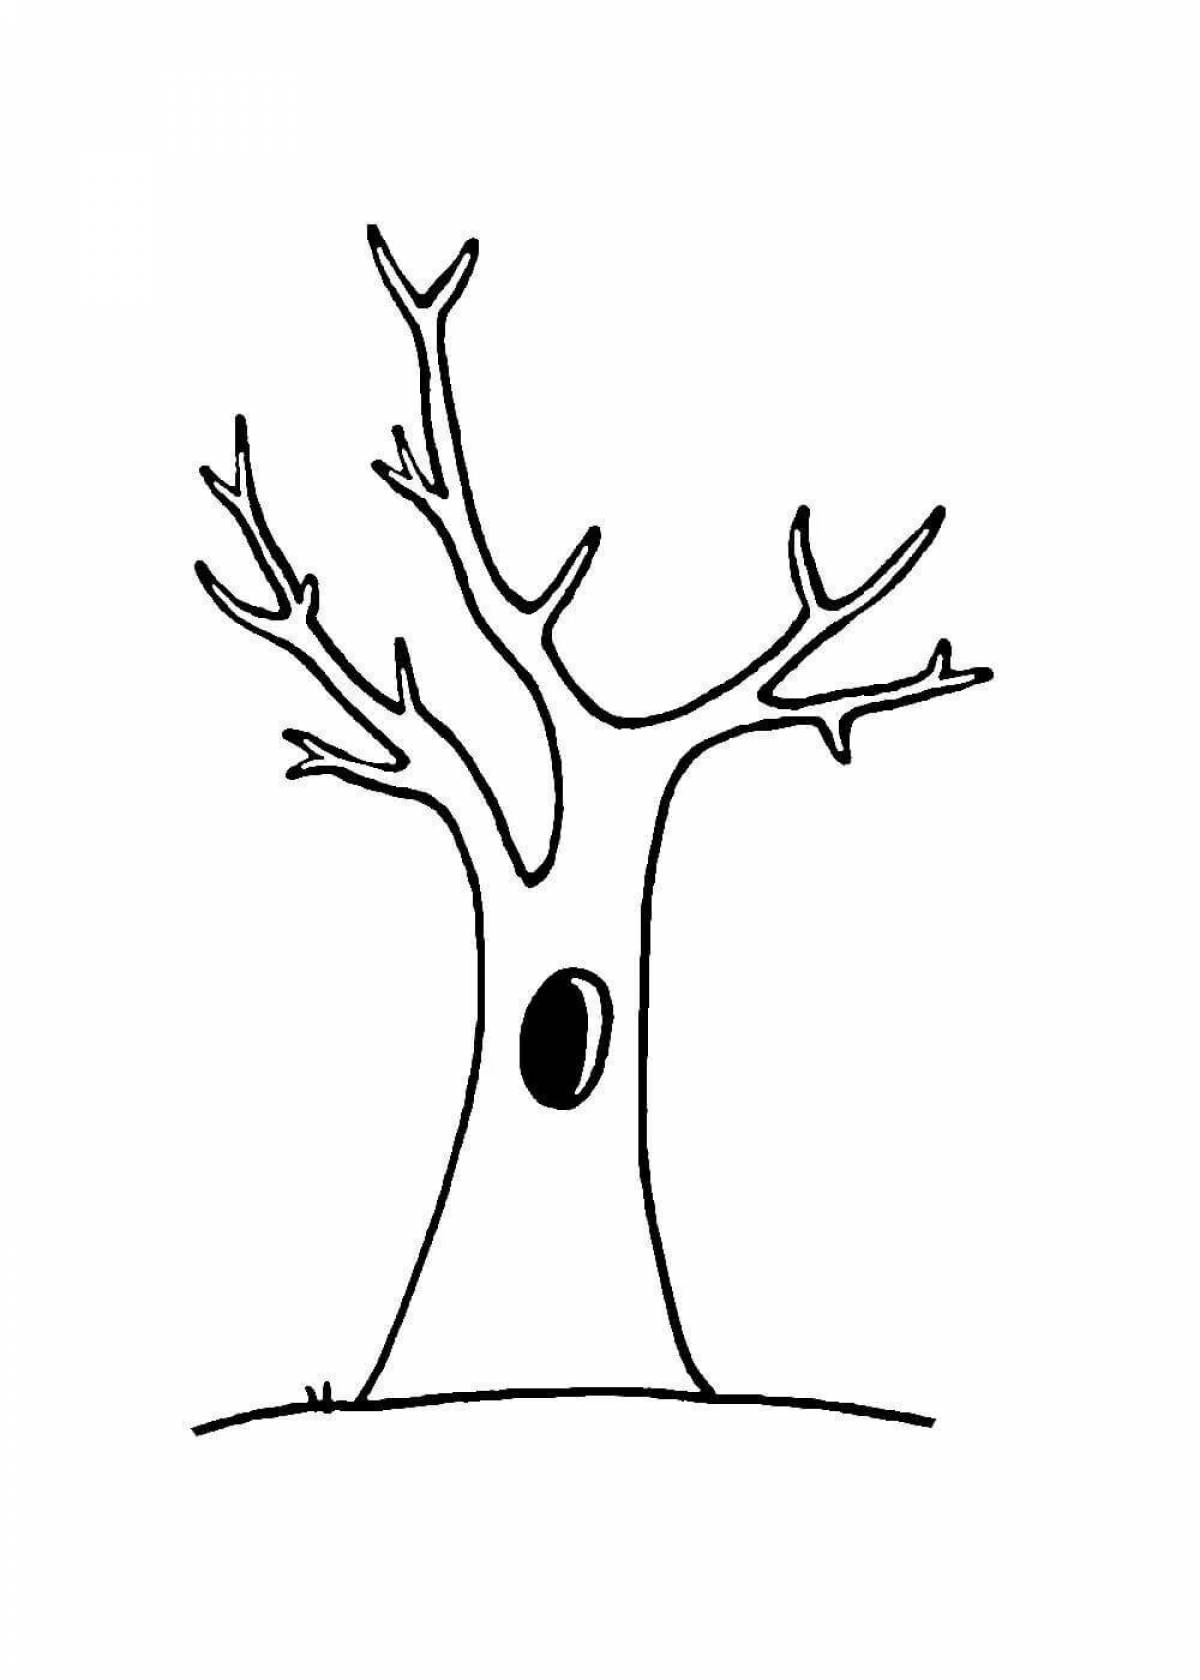 Tree without leaves outline #11